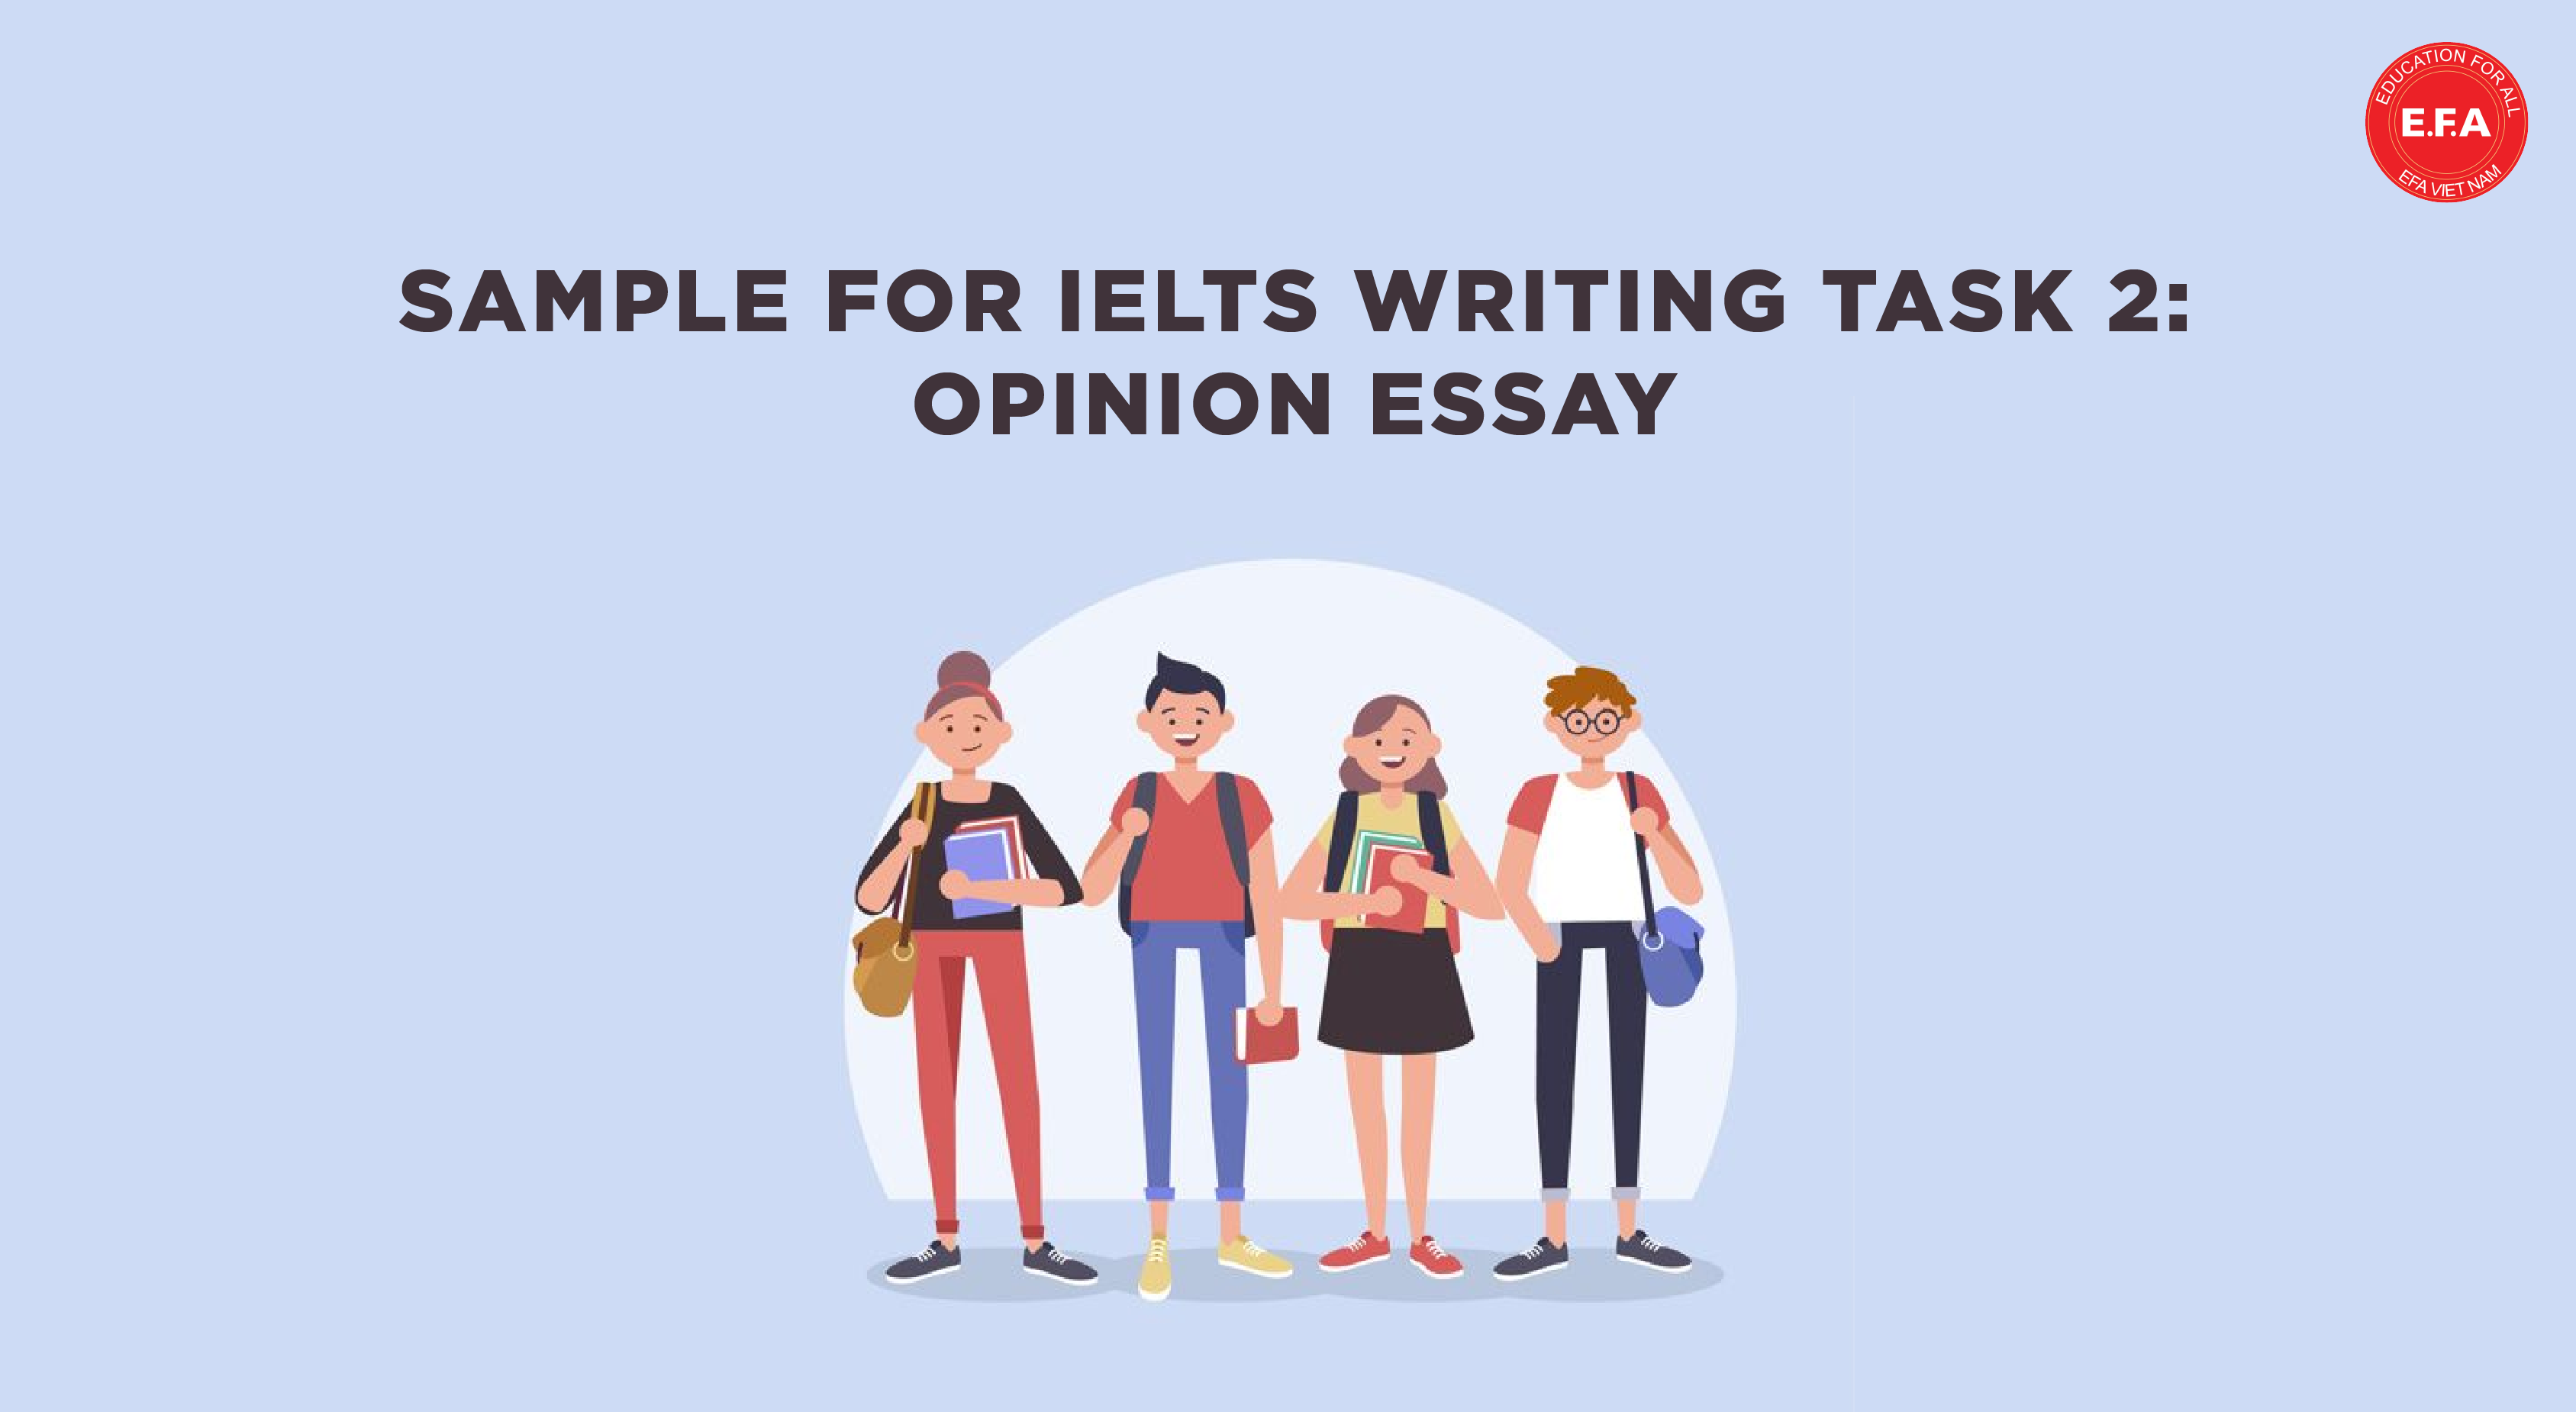 Sample for IELTS Writing Task 2 Opinion essay